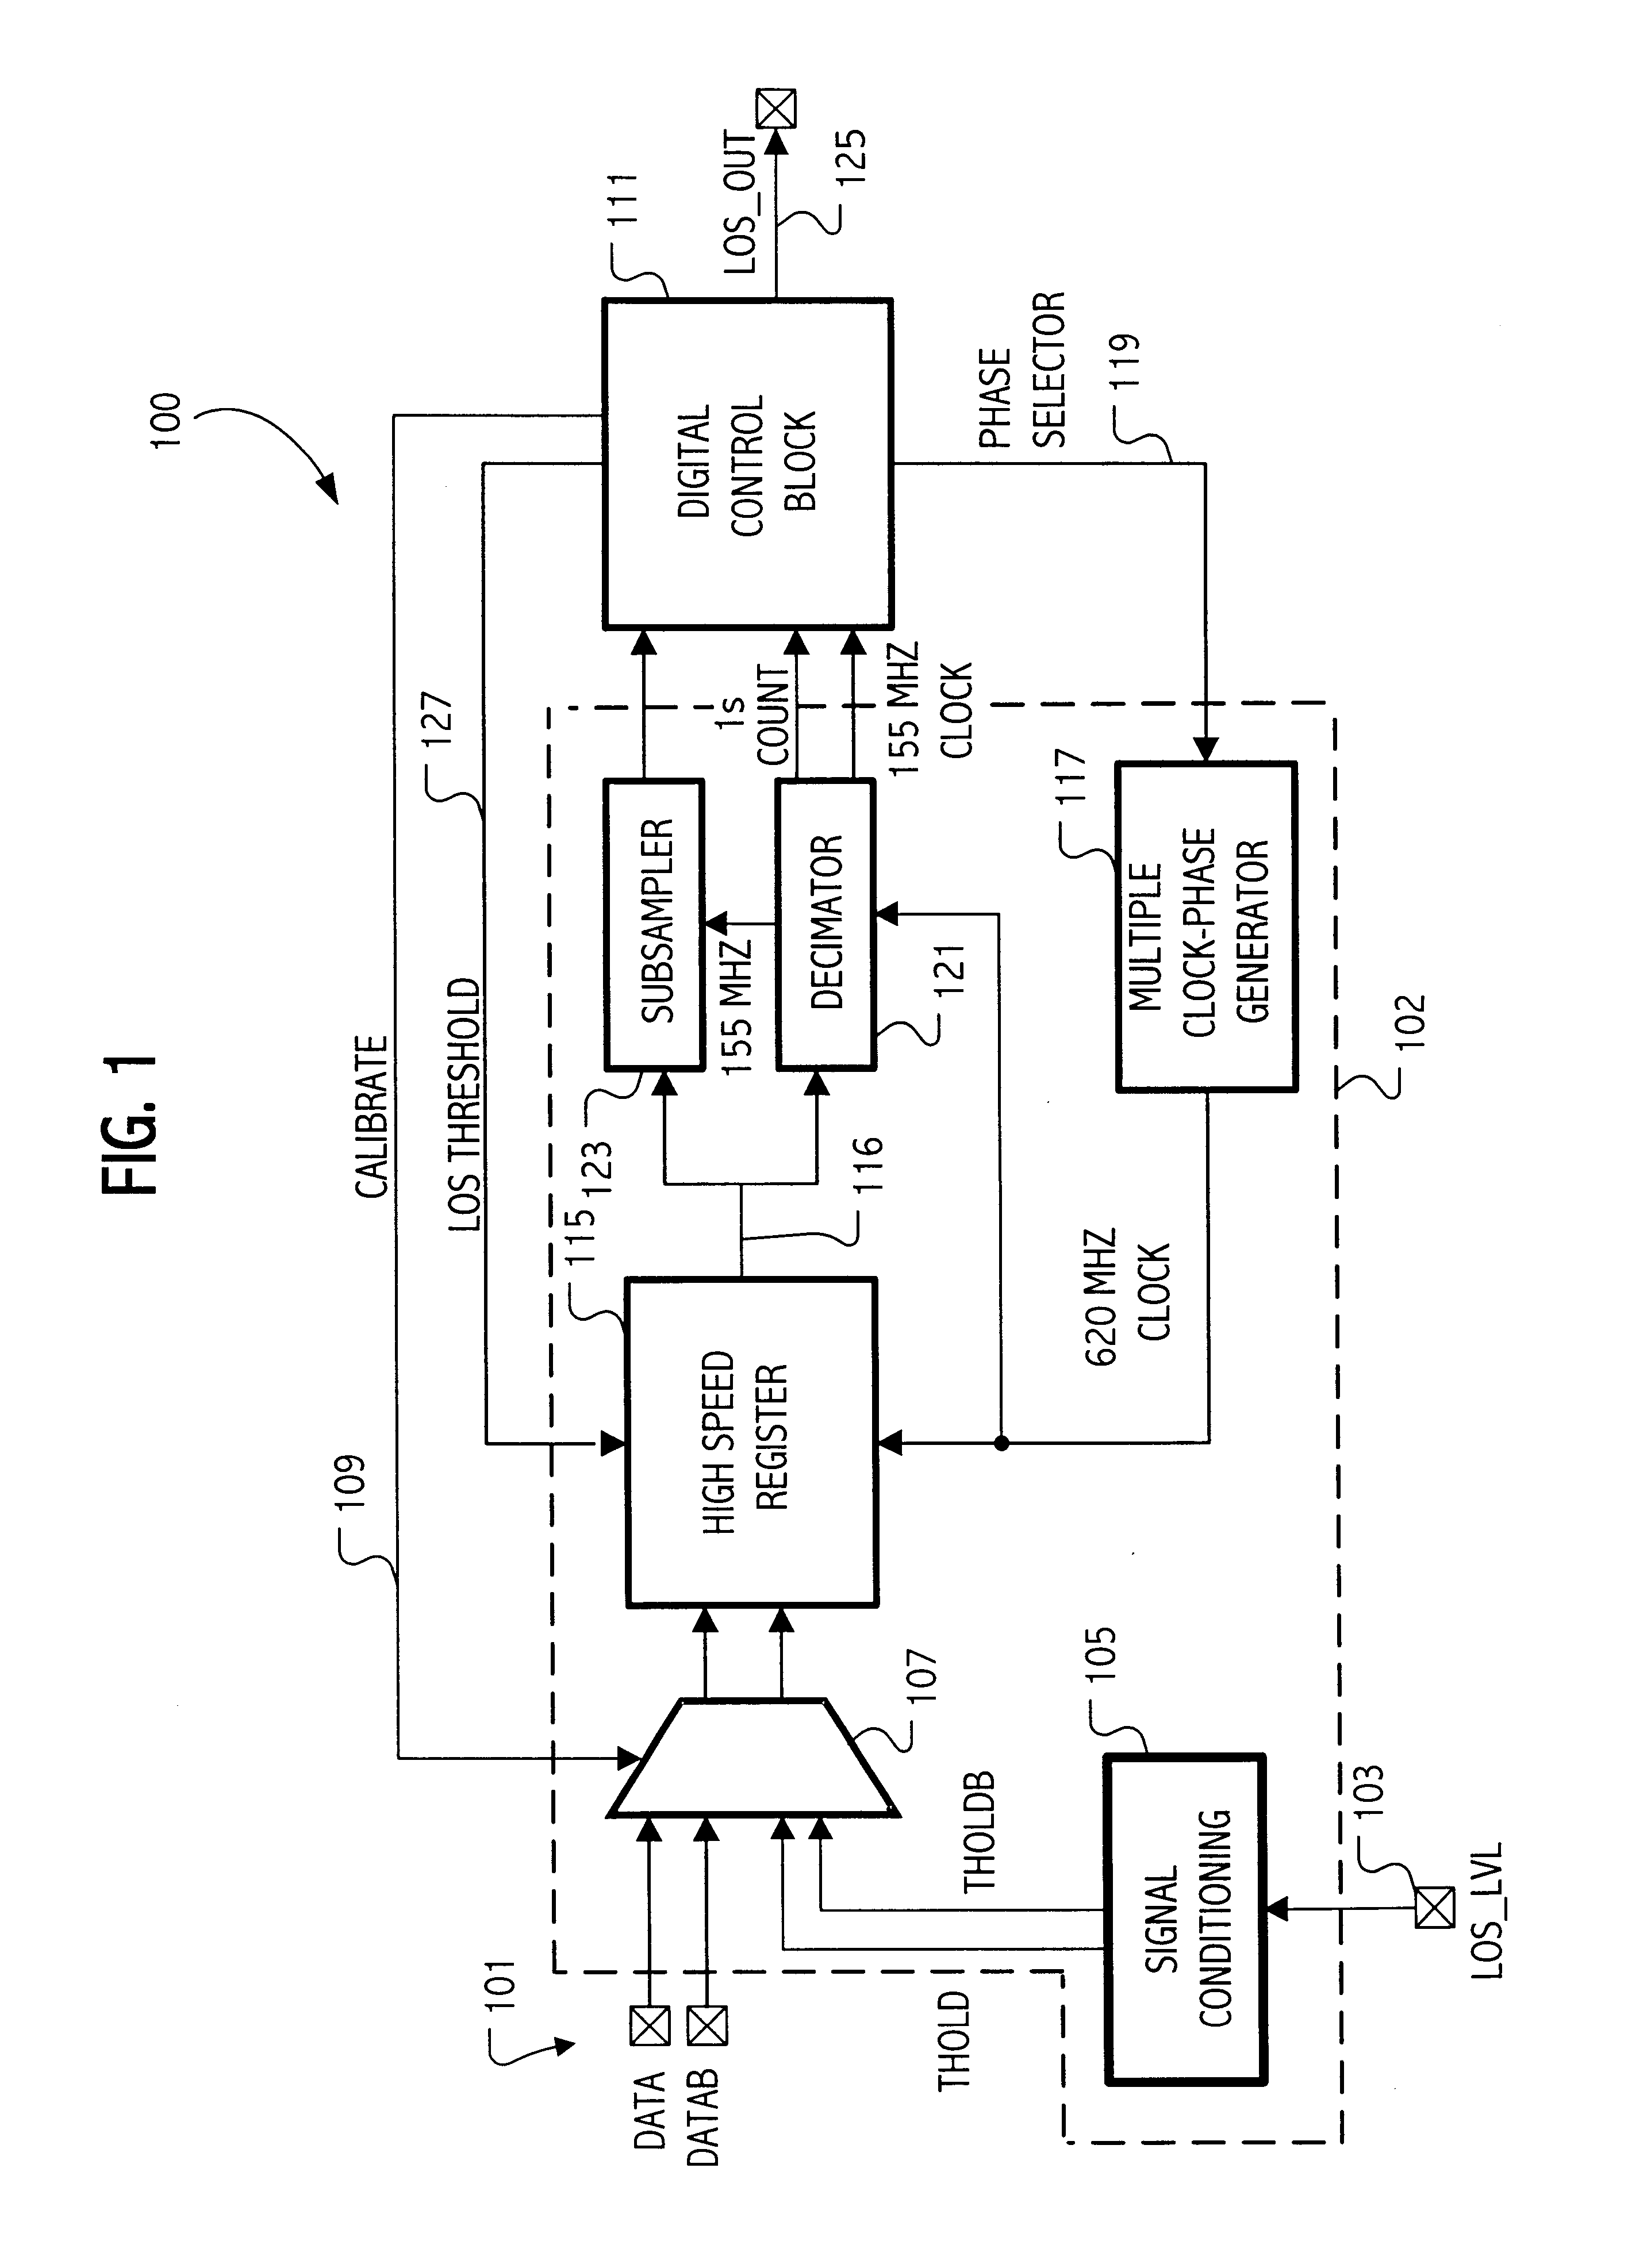 Calibration of a loss of signal detection system